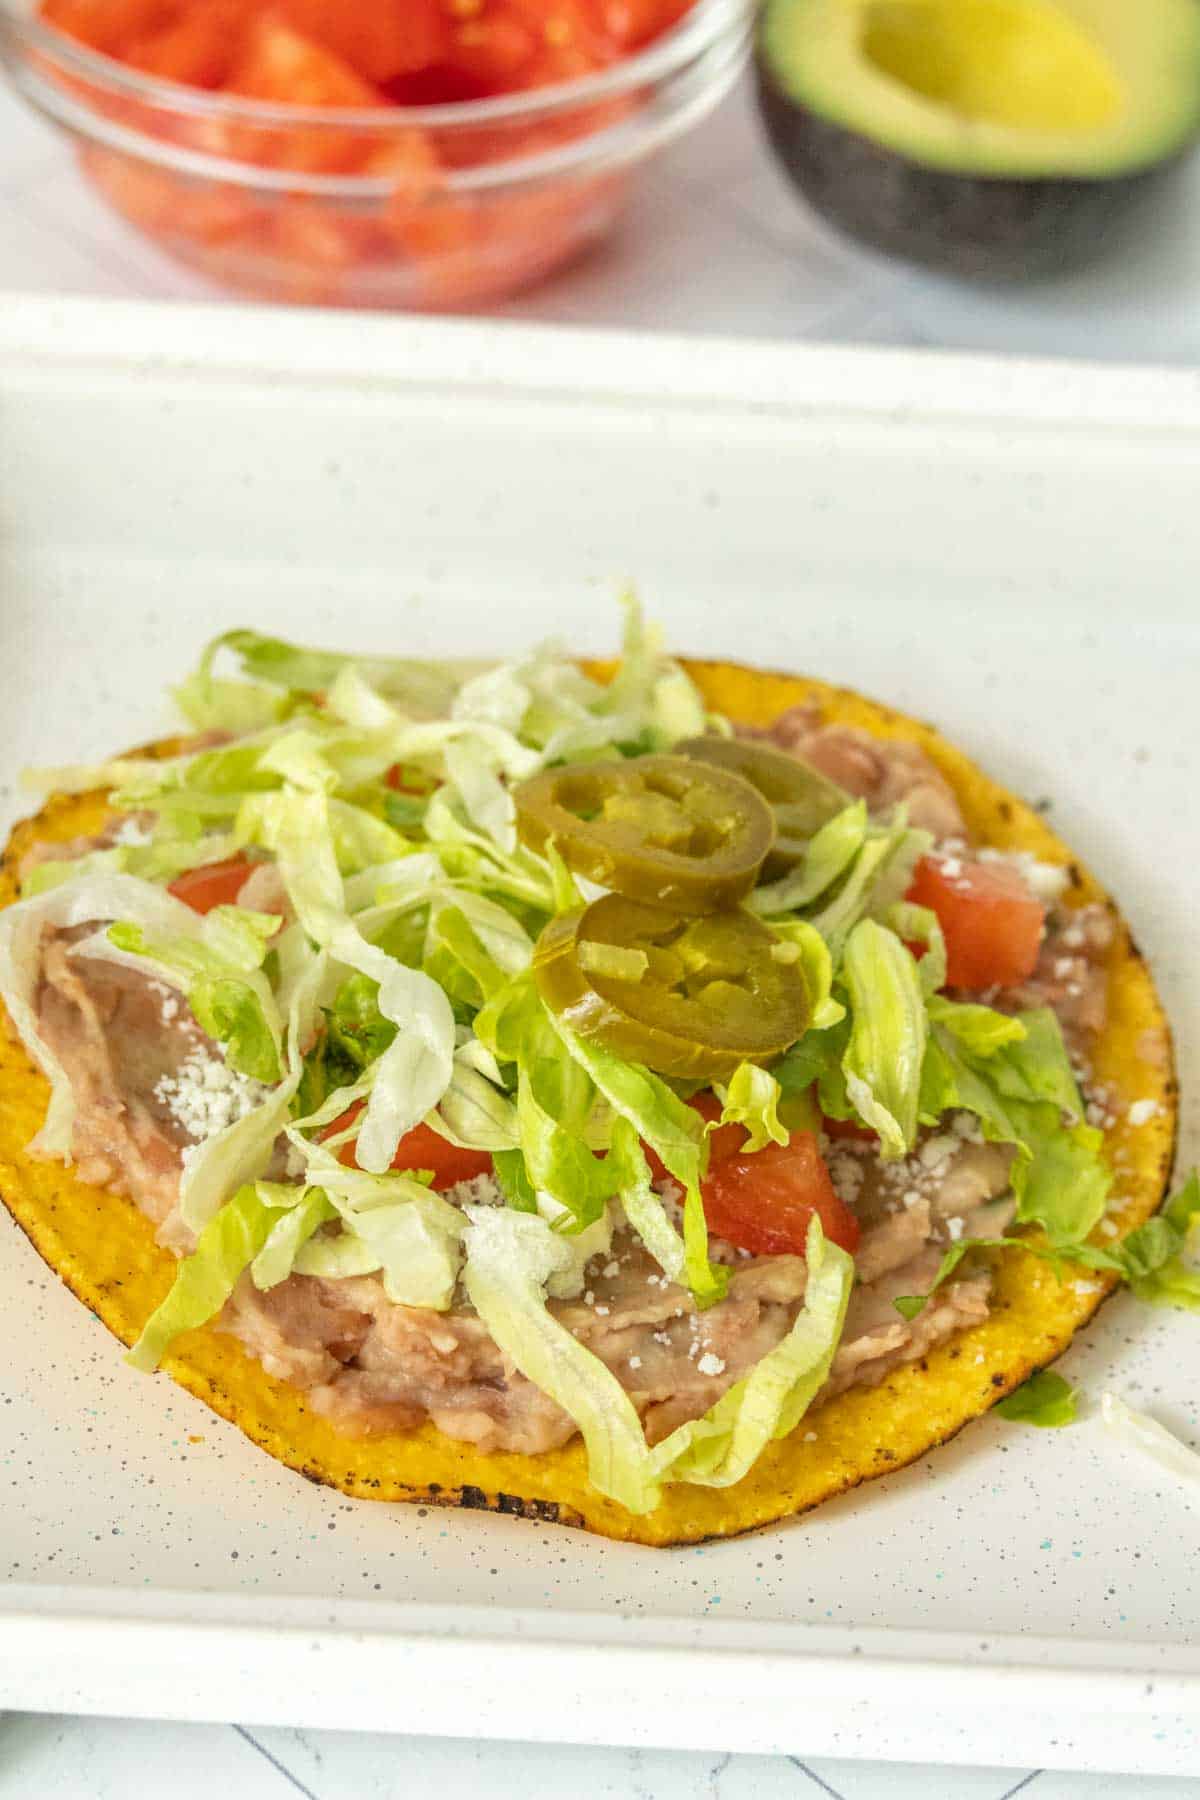 Tostada on a white plate with tomatoes and lettuce.